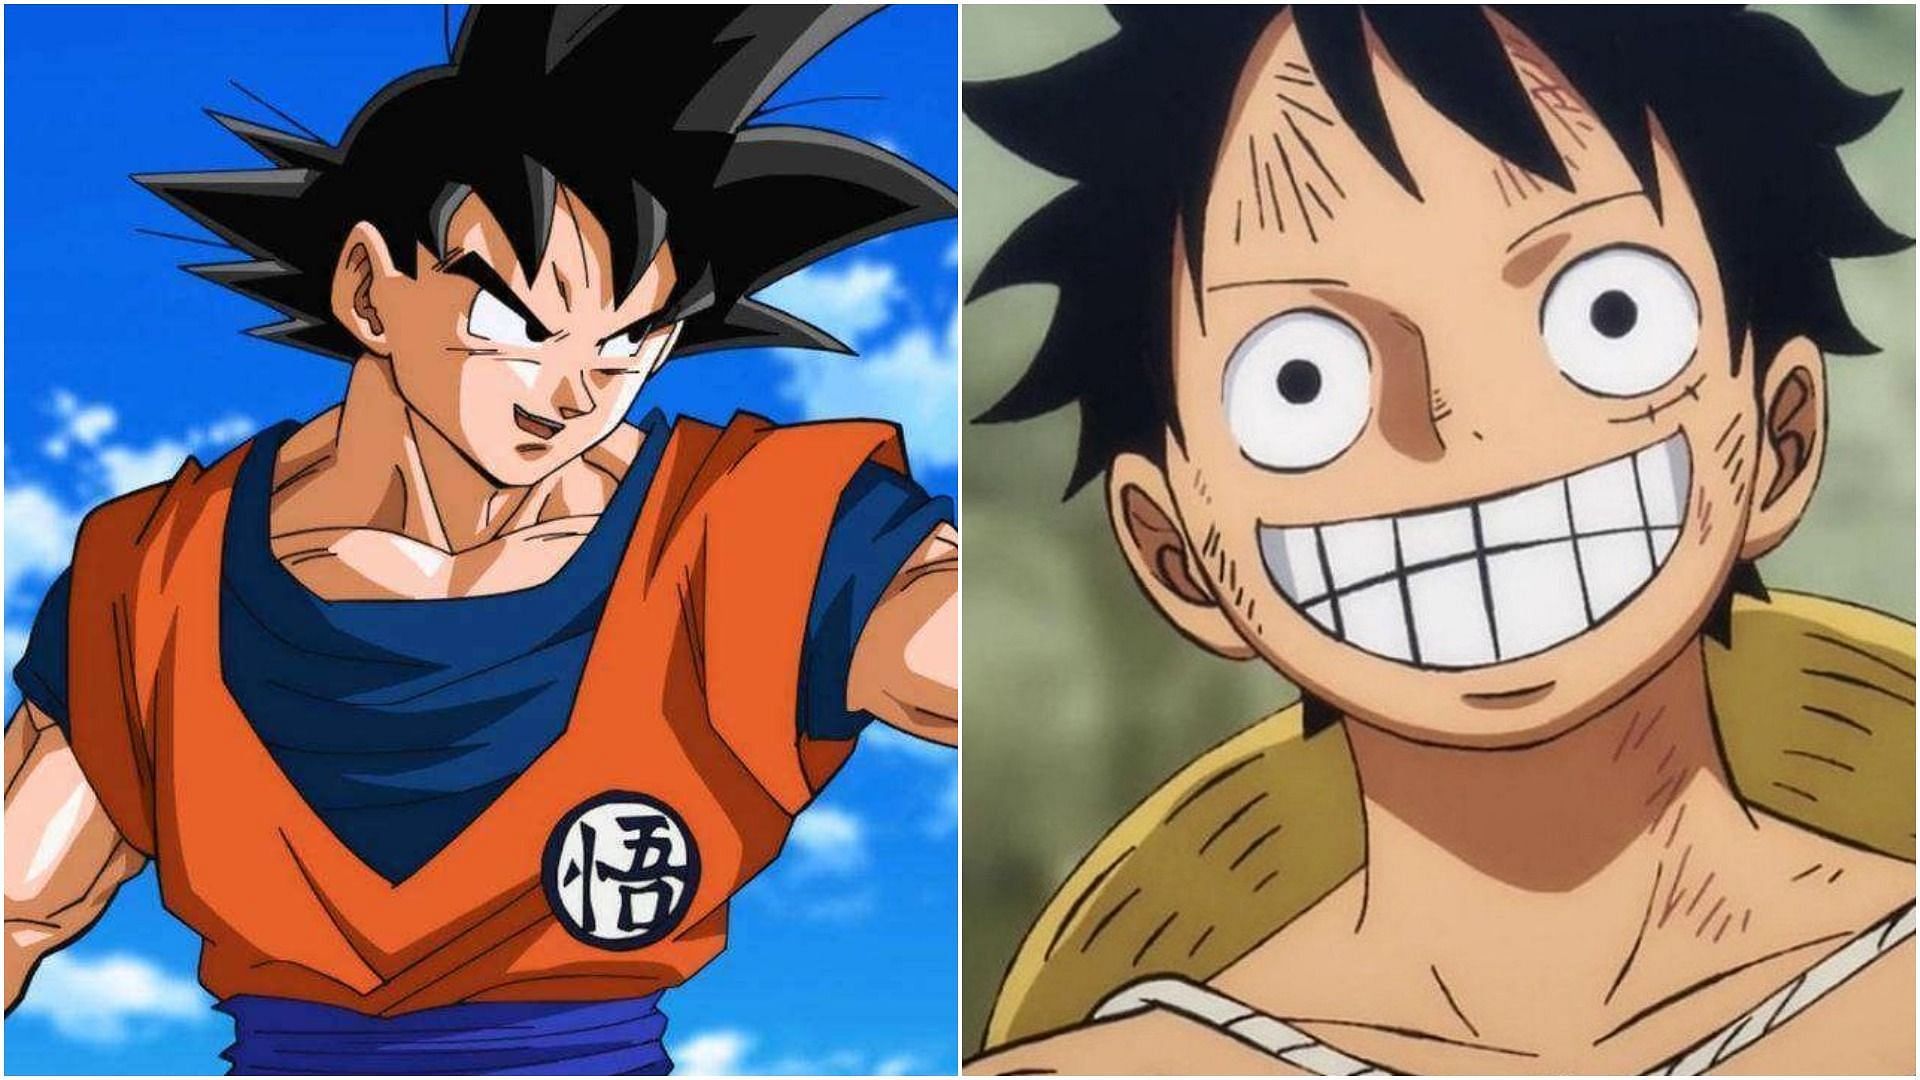 Goku (left) and Luffy (right) are being heavily debated and compared (Image via Sportskeeda)